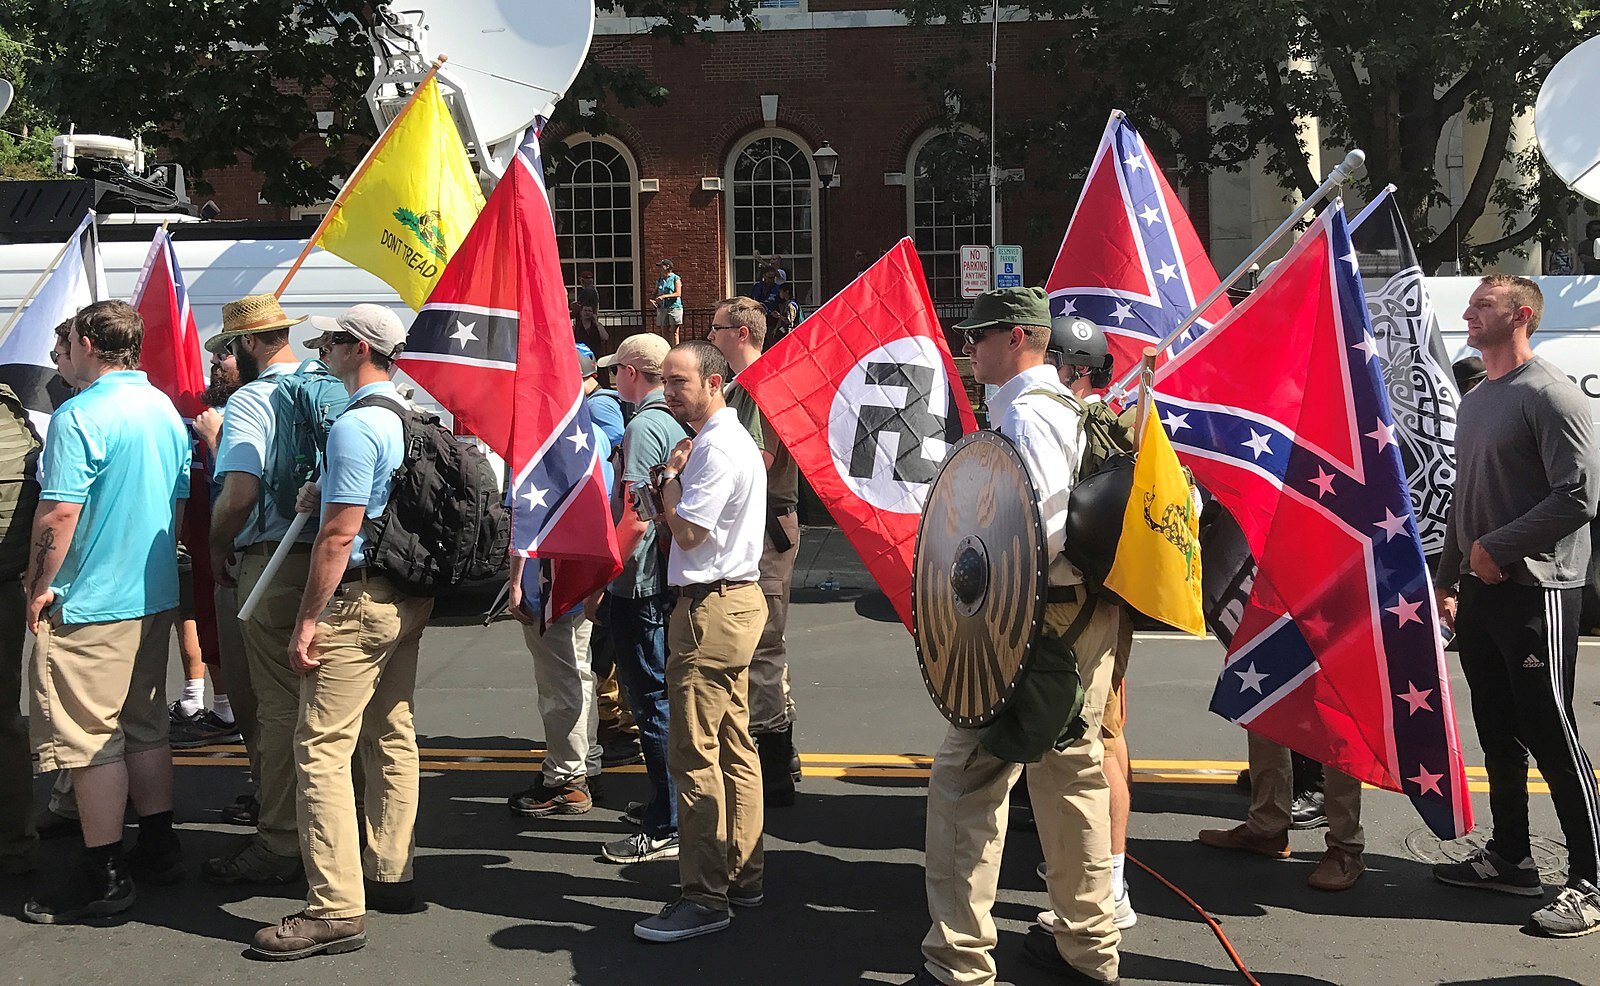 August 12, 2017 – At the “Unite the Right” Rally at Charlottesville, Virginia, alt-right members prepare to enter Emancipation Park holding Nazi, Confederate, and Gadsden "Don't Tread on Me" flags. (Photo by Anthony Crider | Wikimedia Commons)